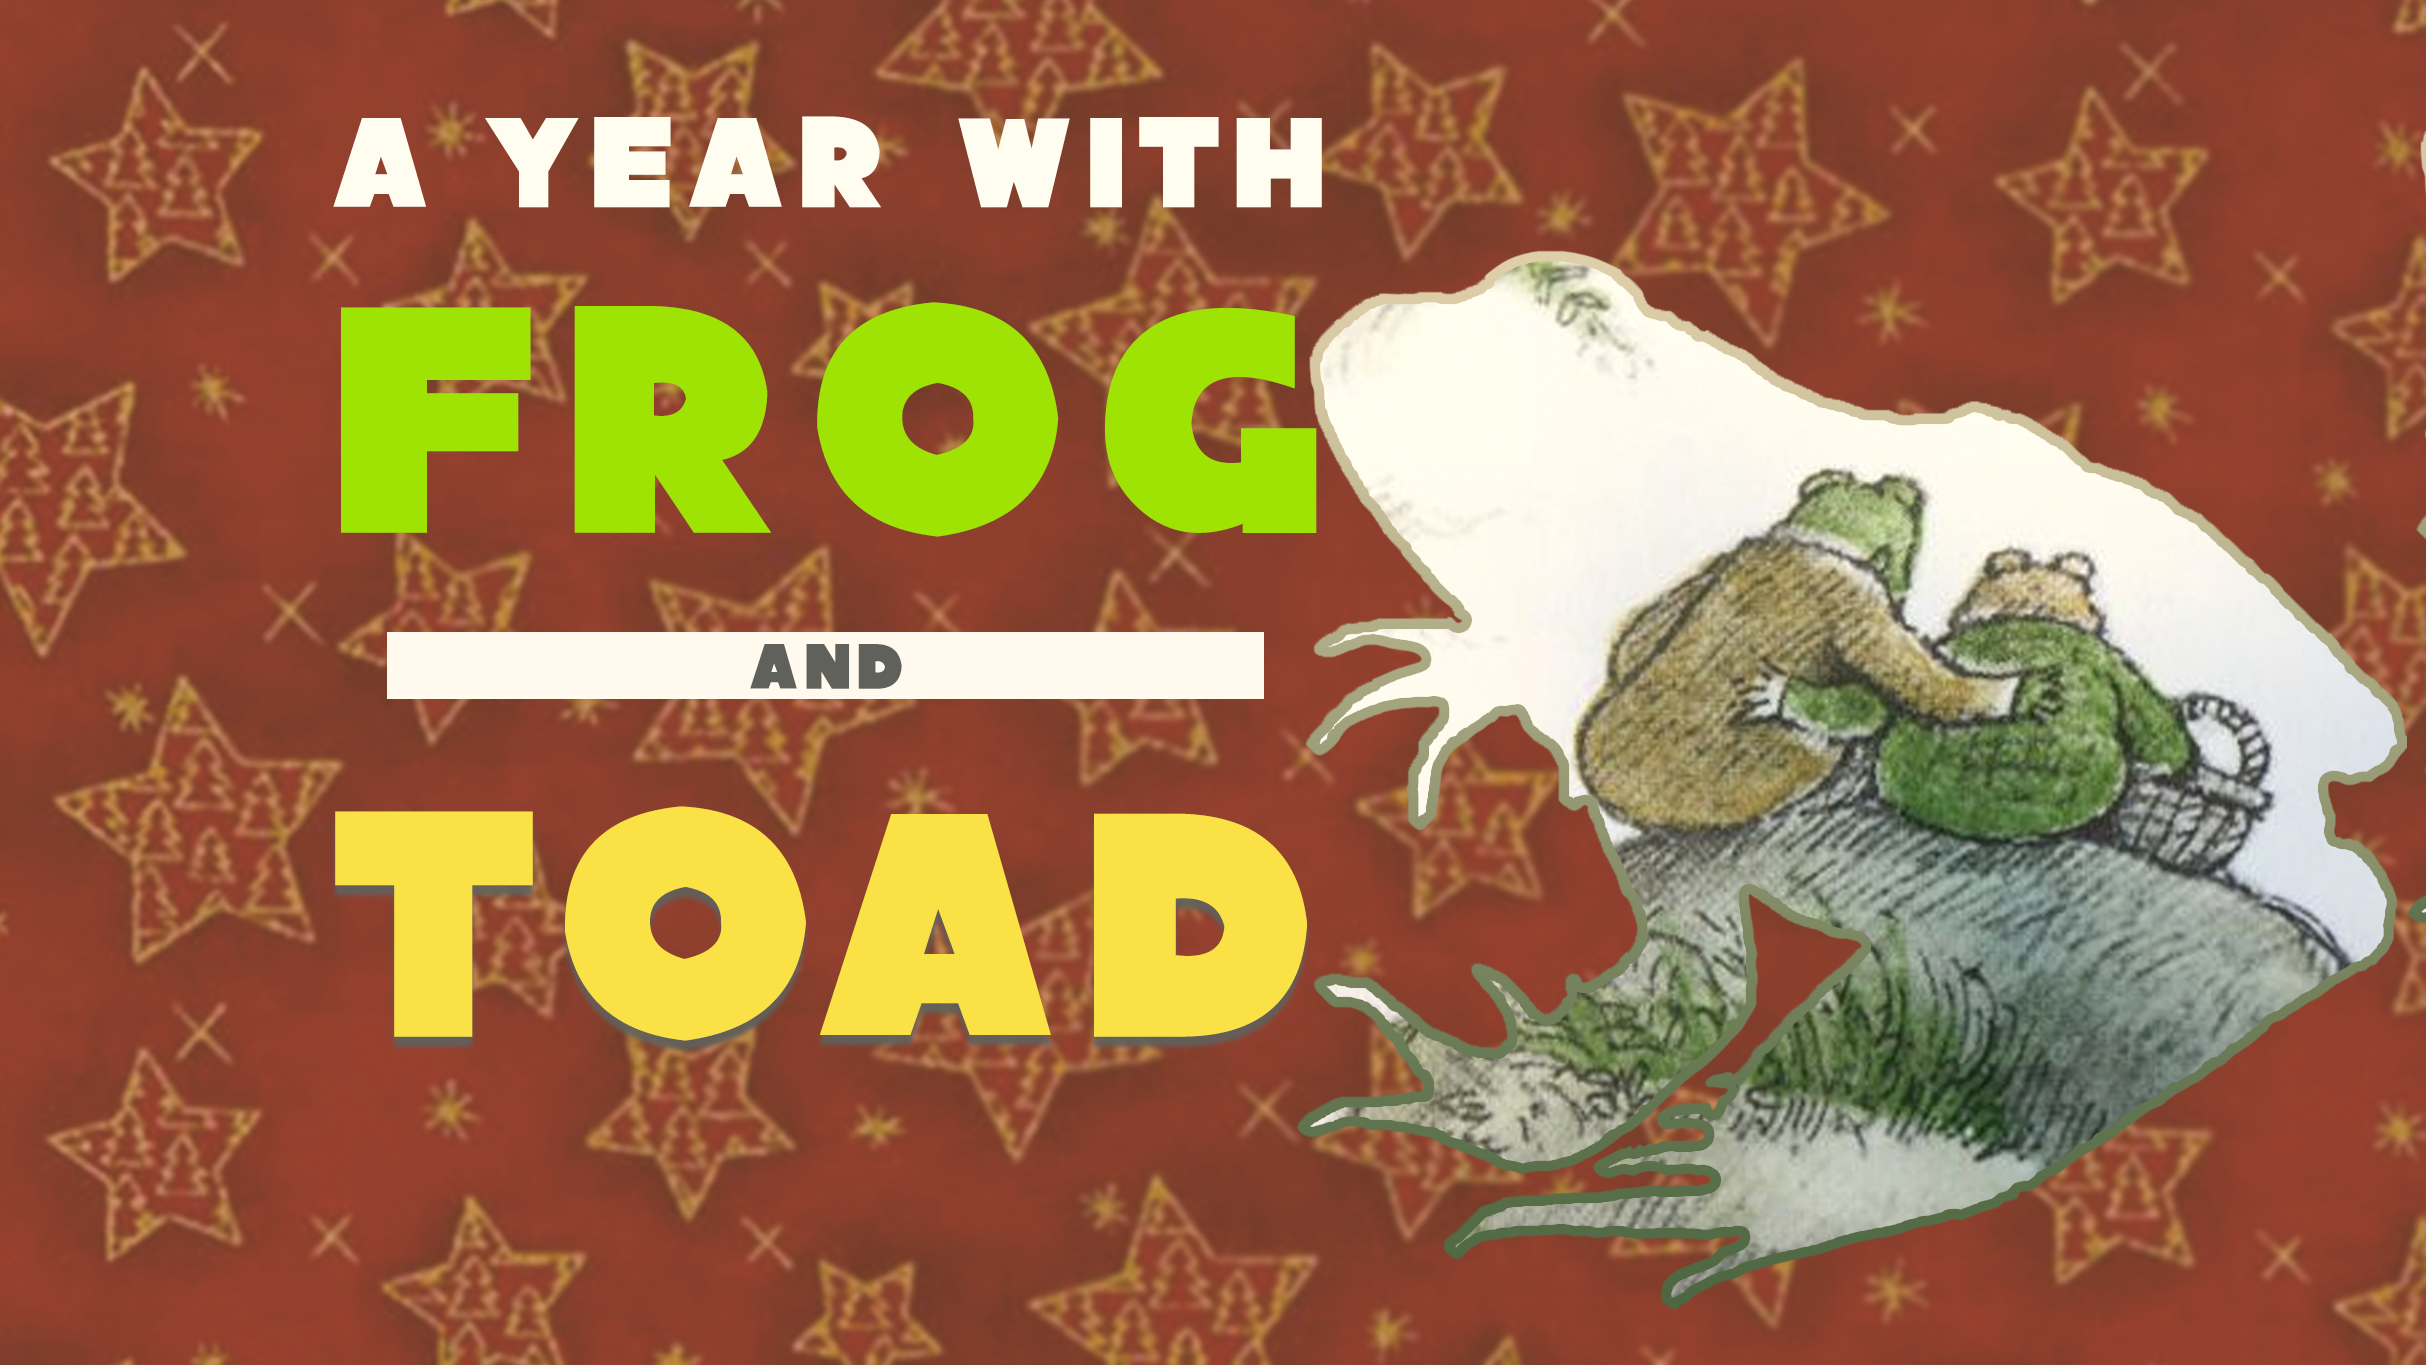 A Year with Frog & Toad